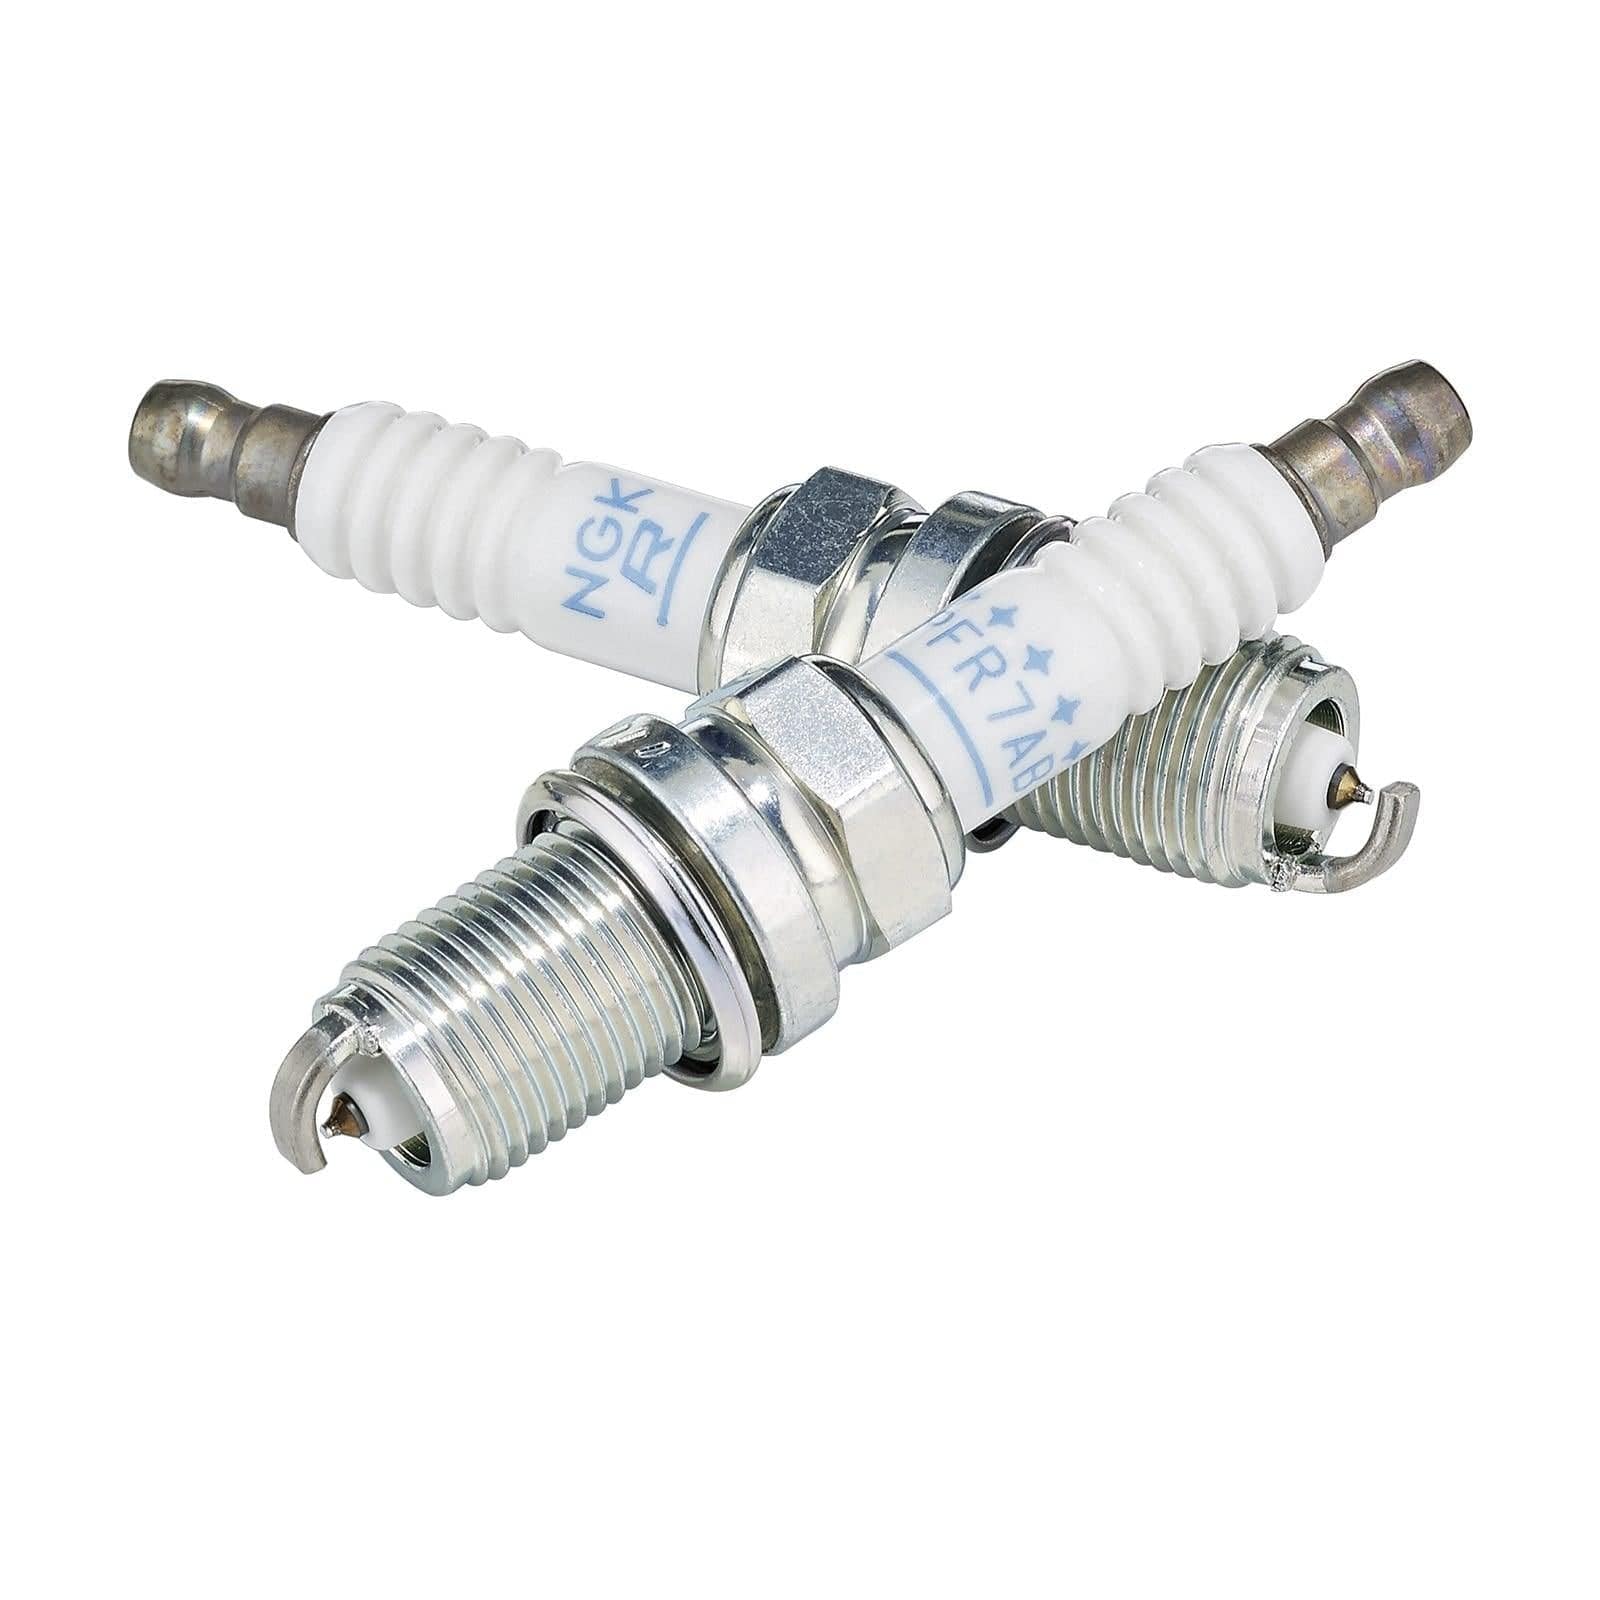 NGK Spark Plugs -900 ACE - MR8DI8 - Factory Recreation